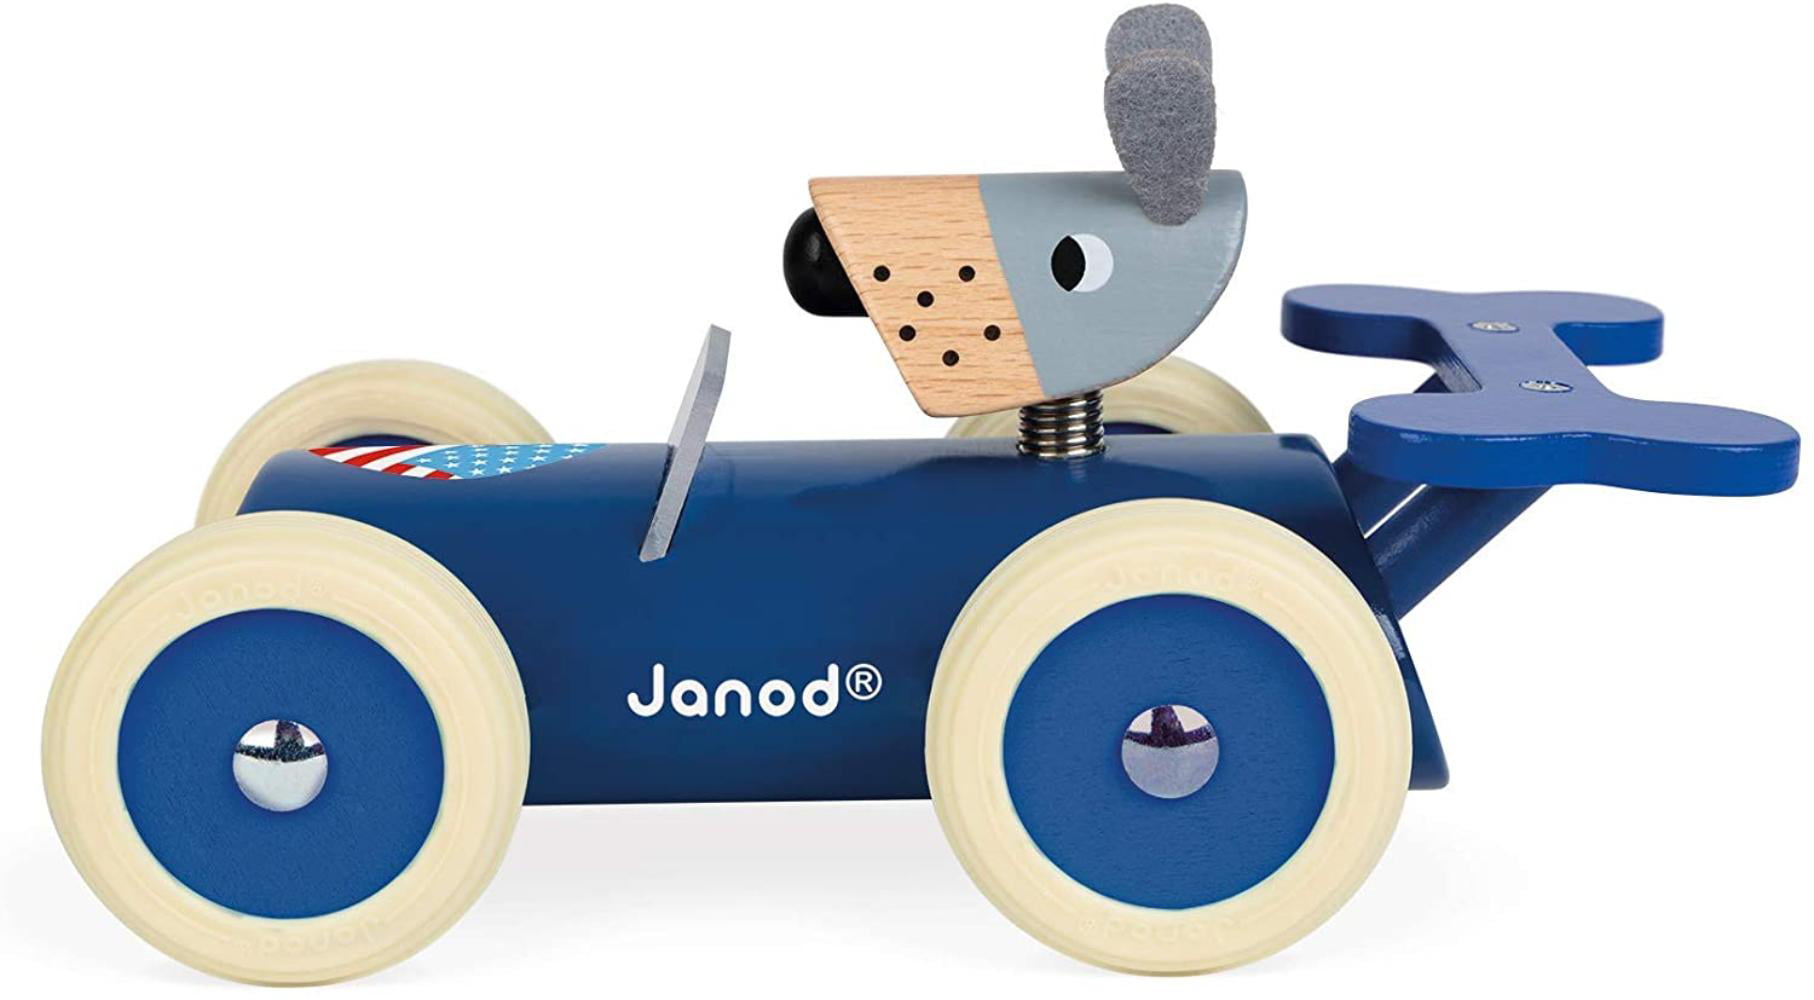 One Color Janod Spirit Solid Cherry Wood Car Push Toy with Child-Safe Water-Based Lacquer & Wobbly Rony Rhino Driver for Ages 18 Months+ J04492 Rubber Wheels 